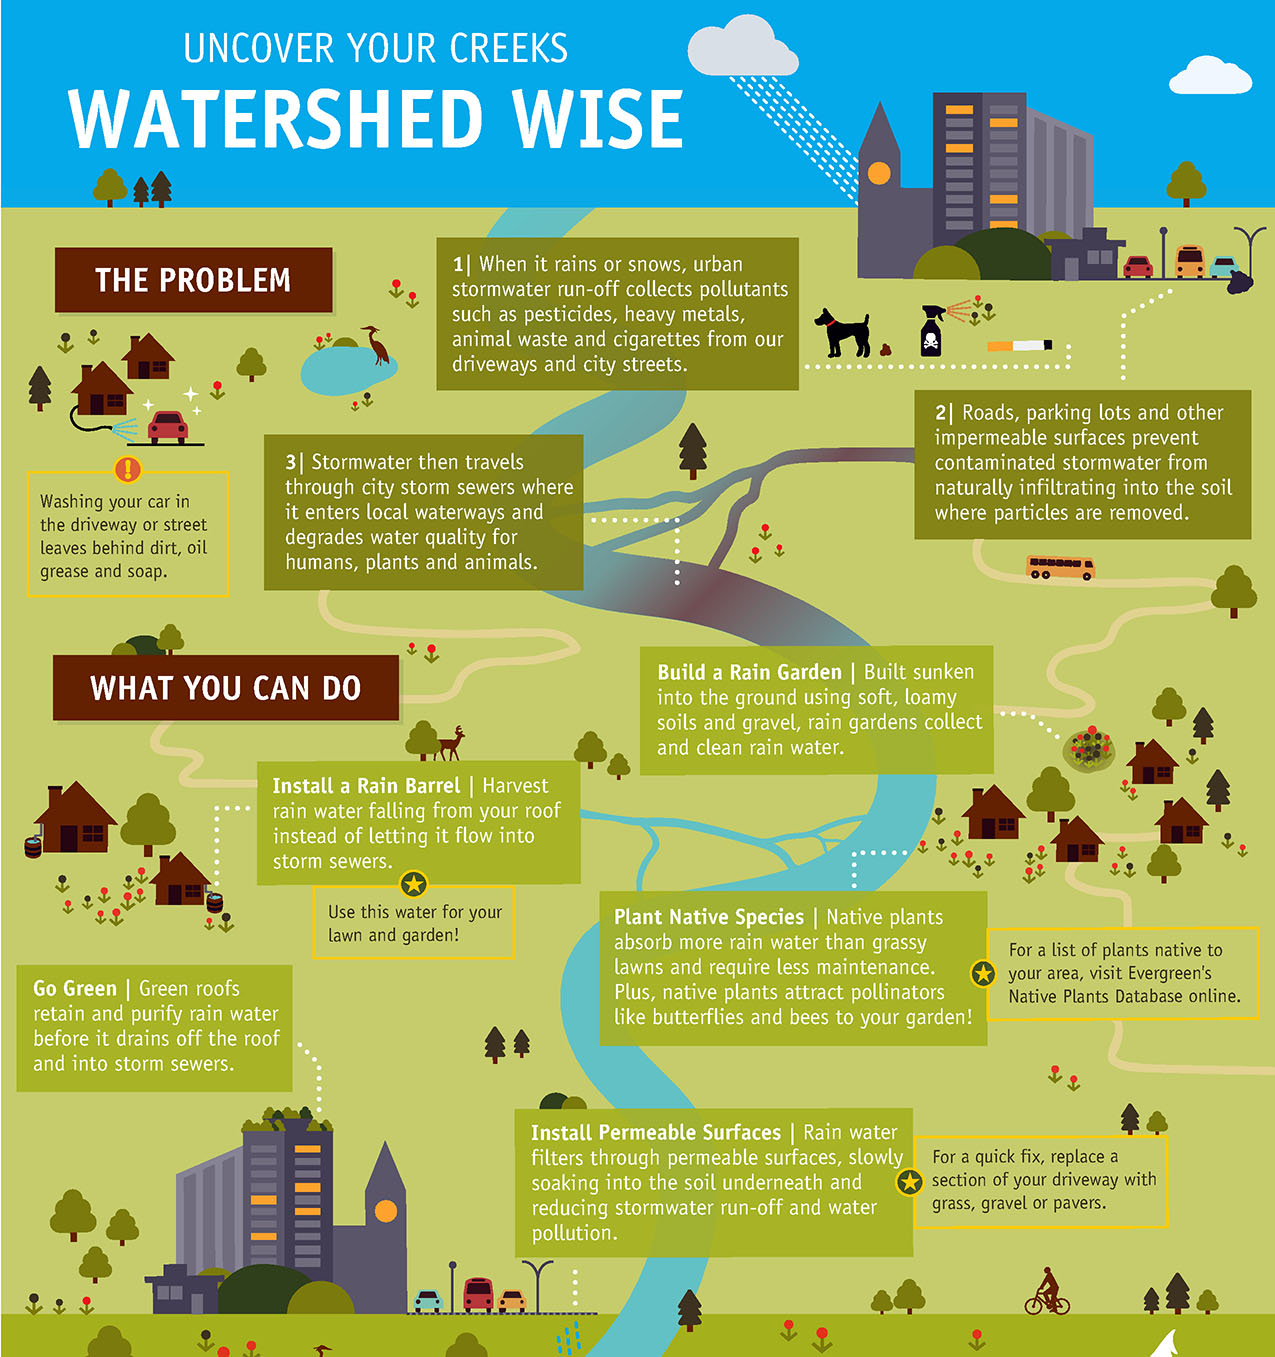 Watershed-wise